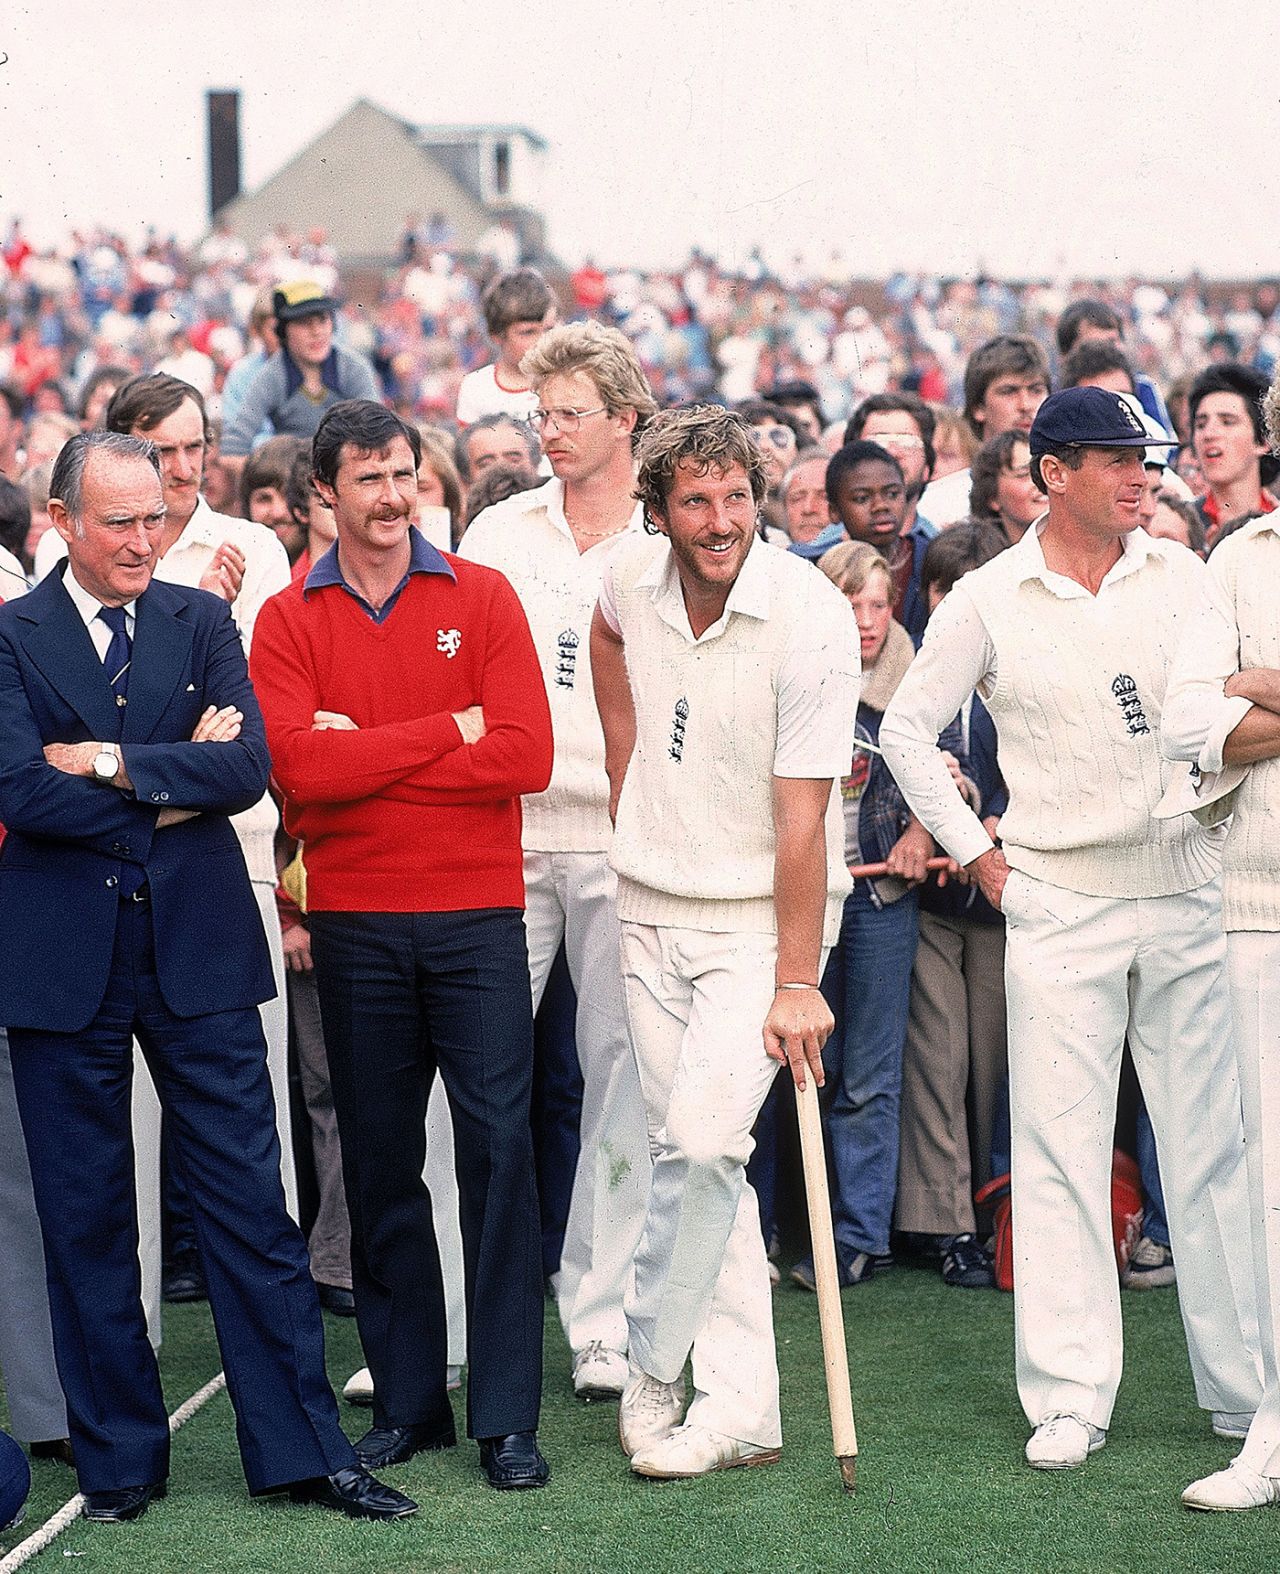 Graham Yallop (red sweater), Ian Botham and Geoff Boycott at the presentation, England v Australia, day five, fifth Test, August 17, 1981
